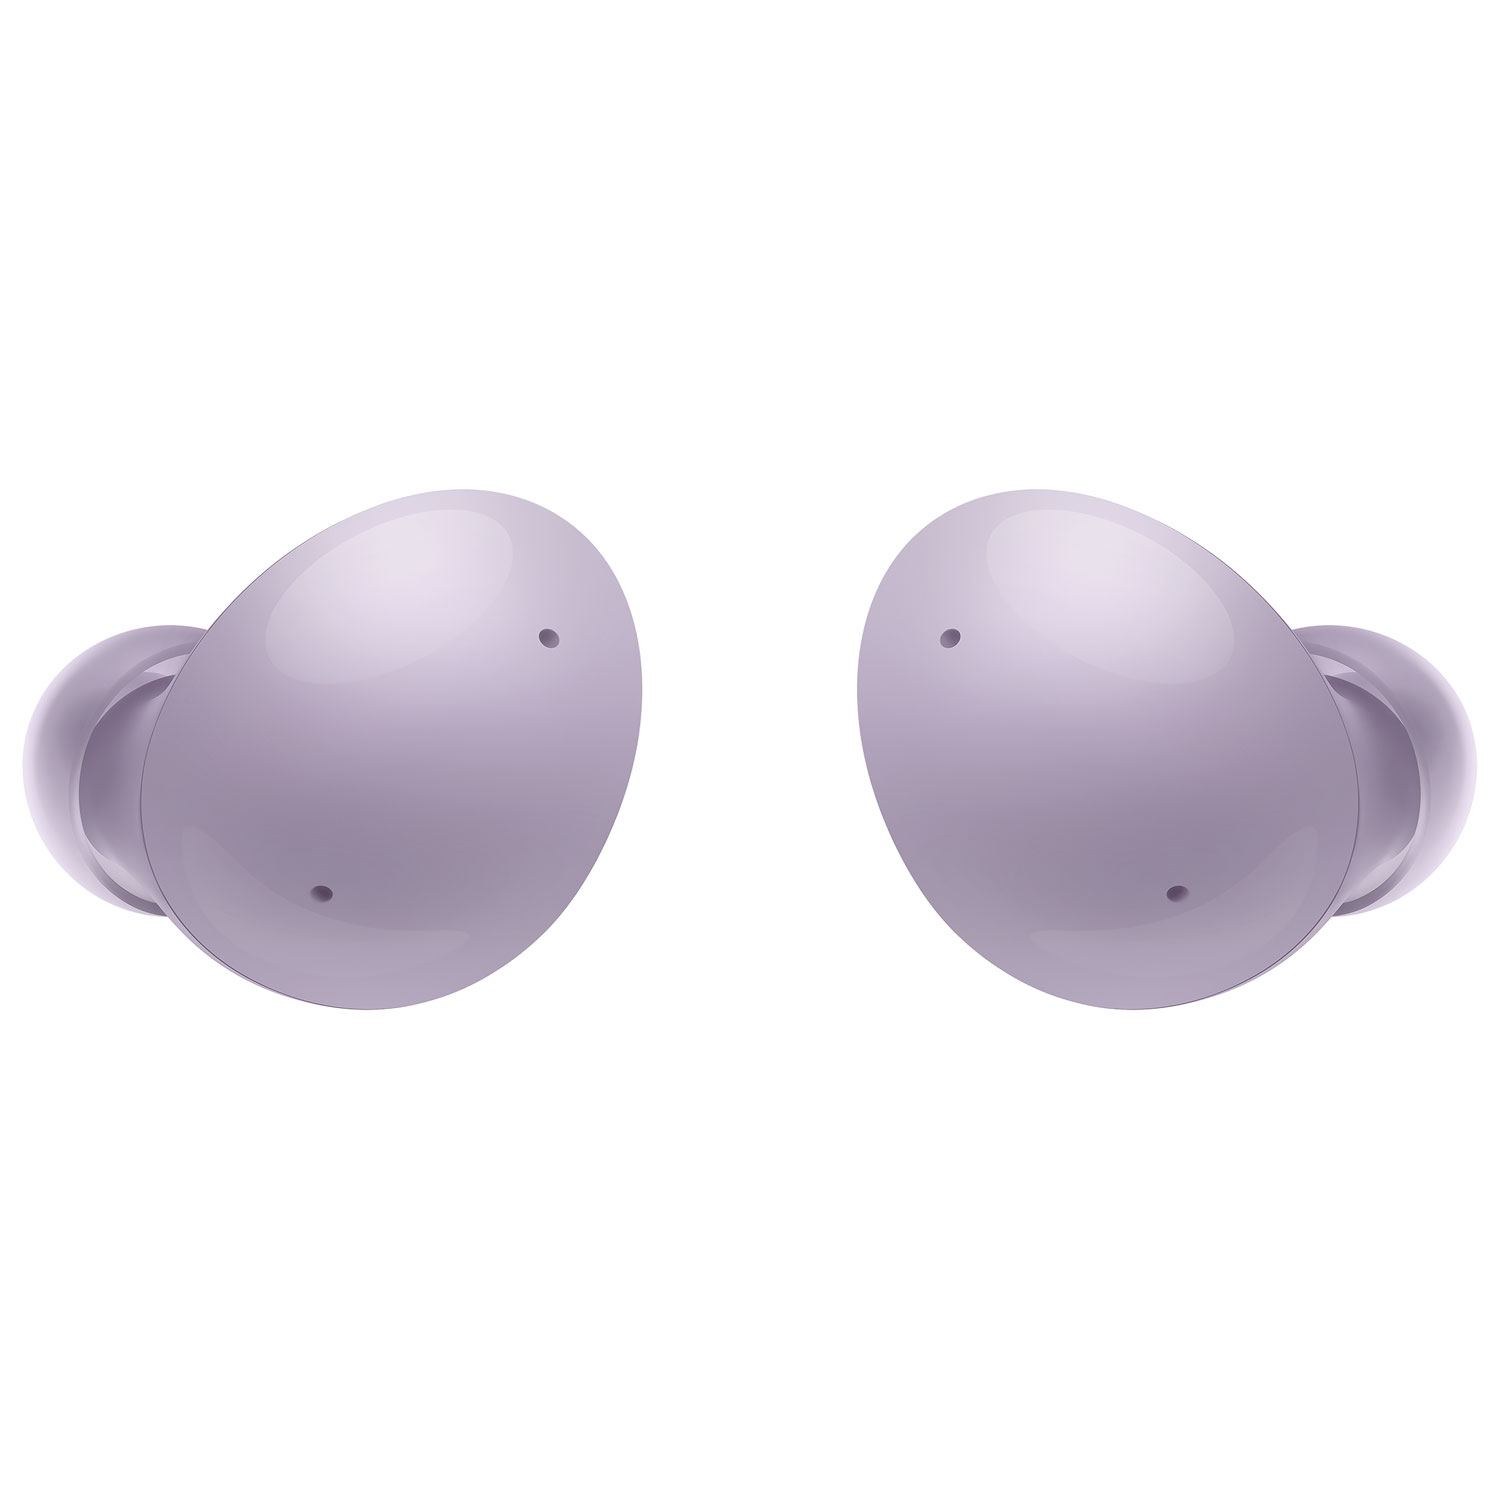 Samsung Galaxy Buds2 In-Ear Noise Cancelling Truly Wireless Headphones - Lavender